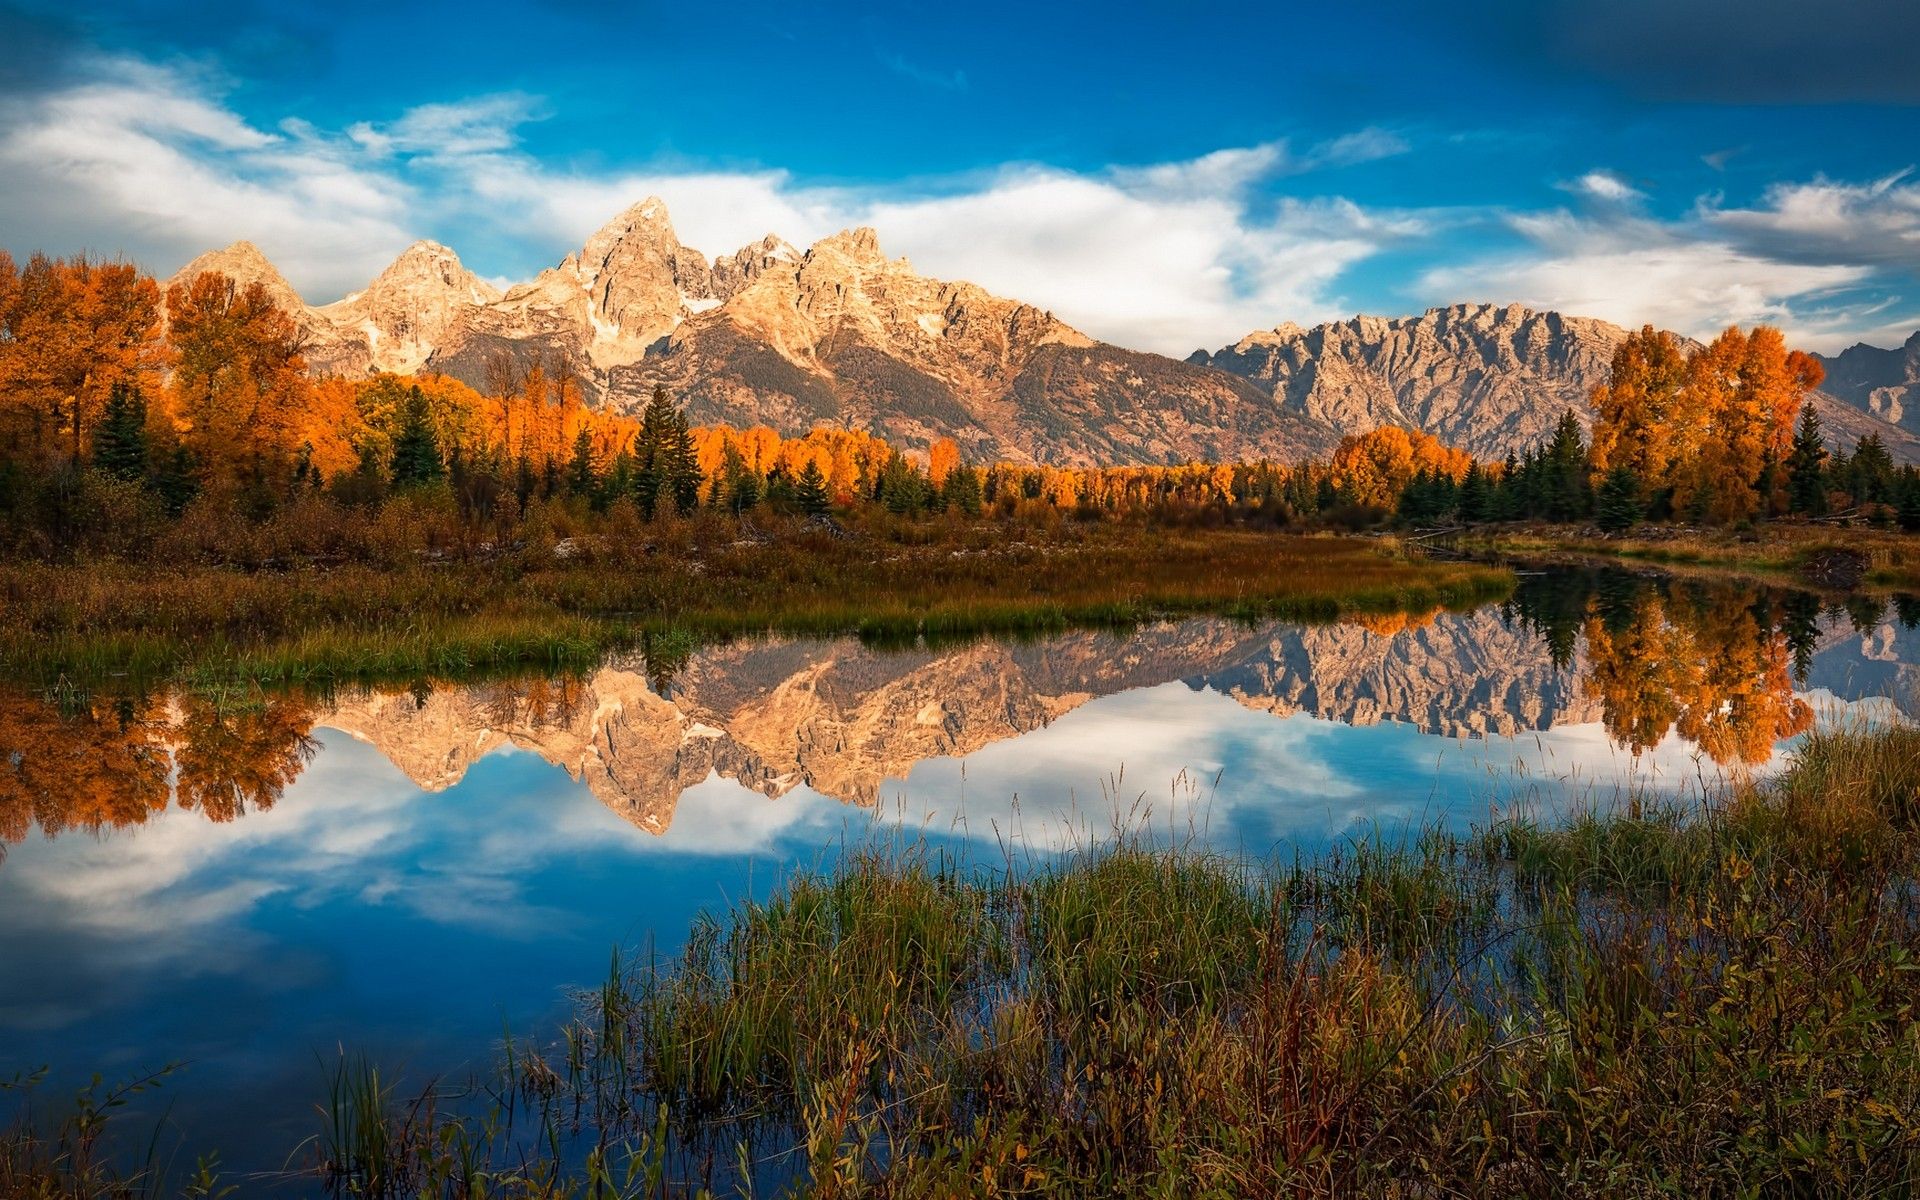 Wallpaper, landscape, colorful, forest, fall, mountains, lake, nature, reflection, clouds, sunrise, morning, river, national park, wilderness, Grand Teton National Park, plateau, cloud, tree, autumn, leaf, dawn, season, meadow, reservoir, tarn, loch